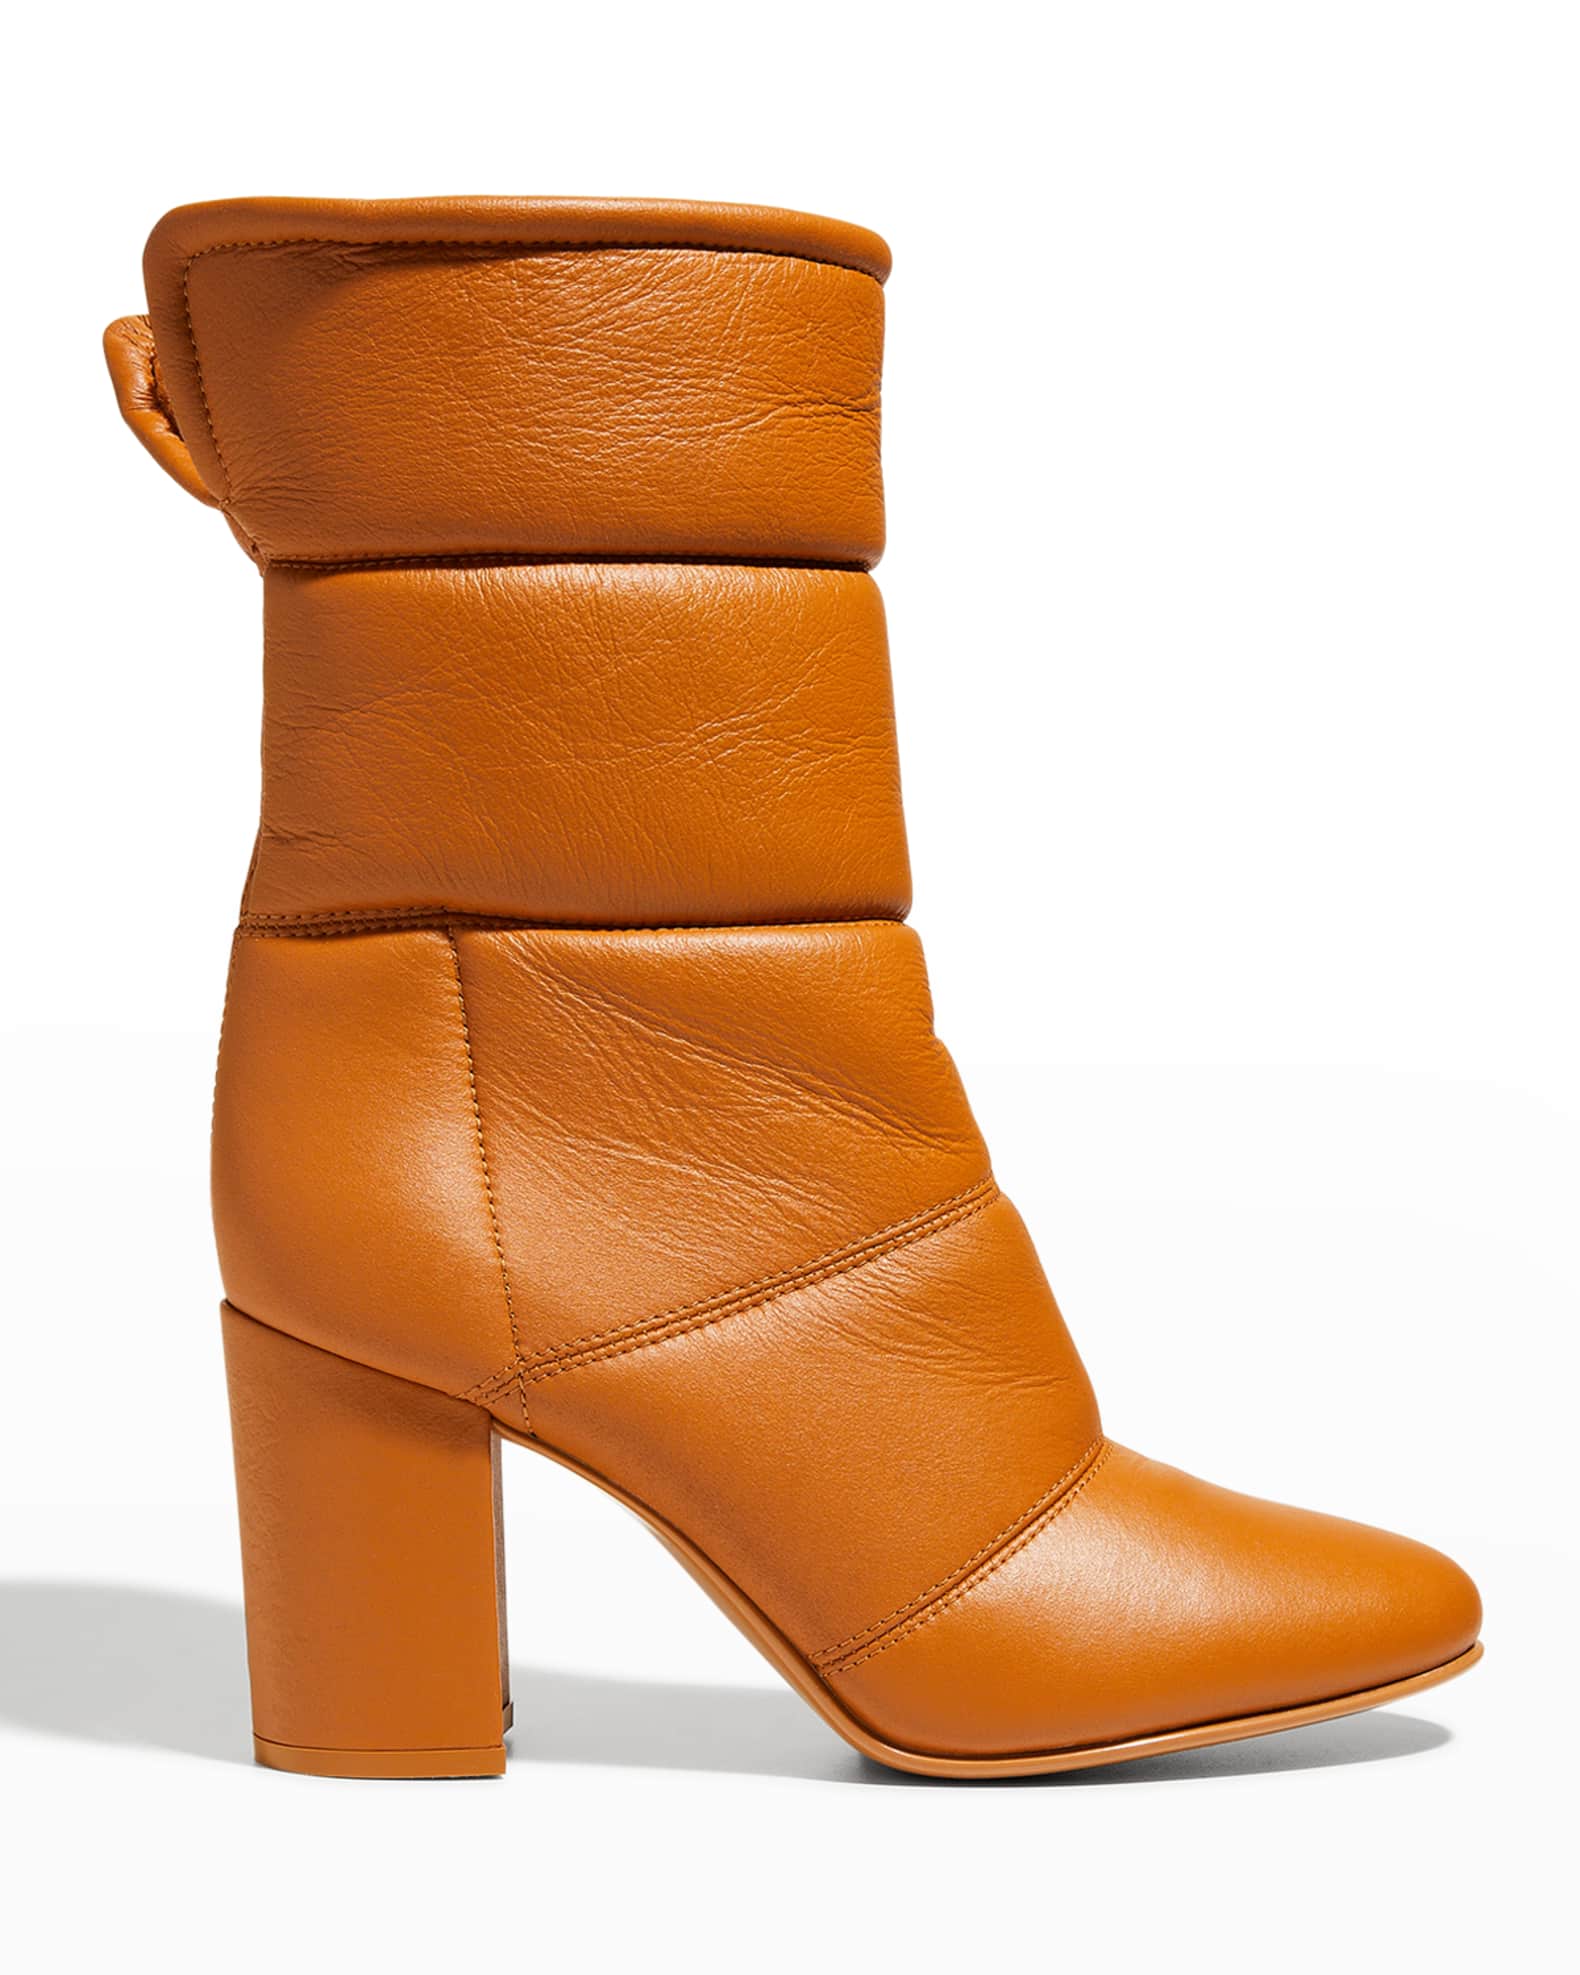 Gianvito Rossi Quilted Lambskin Shearling-Lined Mid Boots | Neiman Marcus